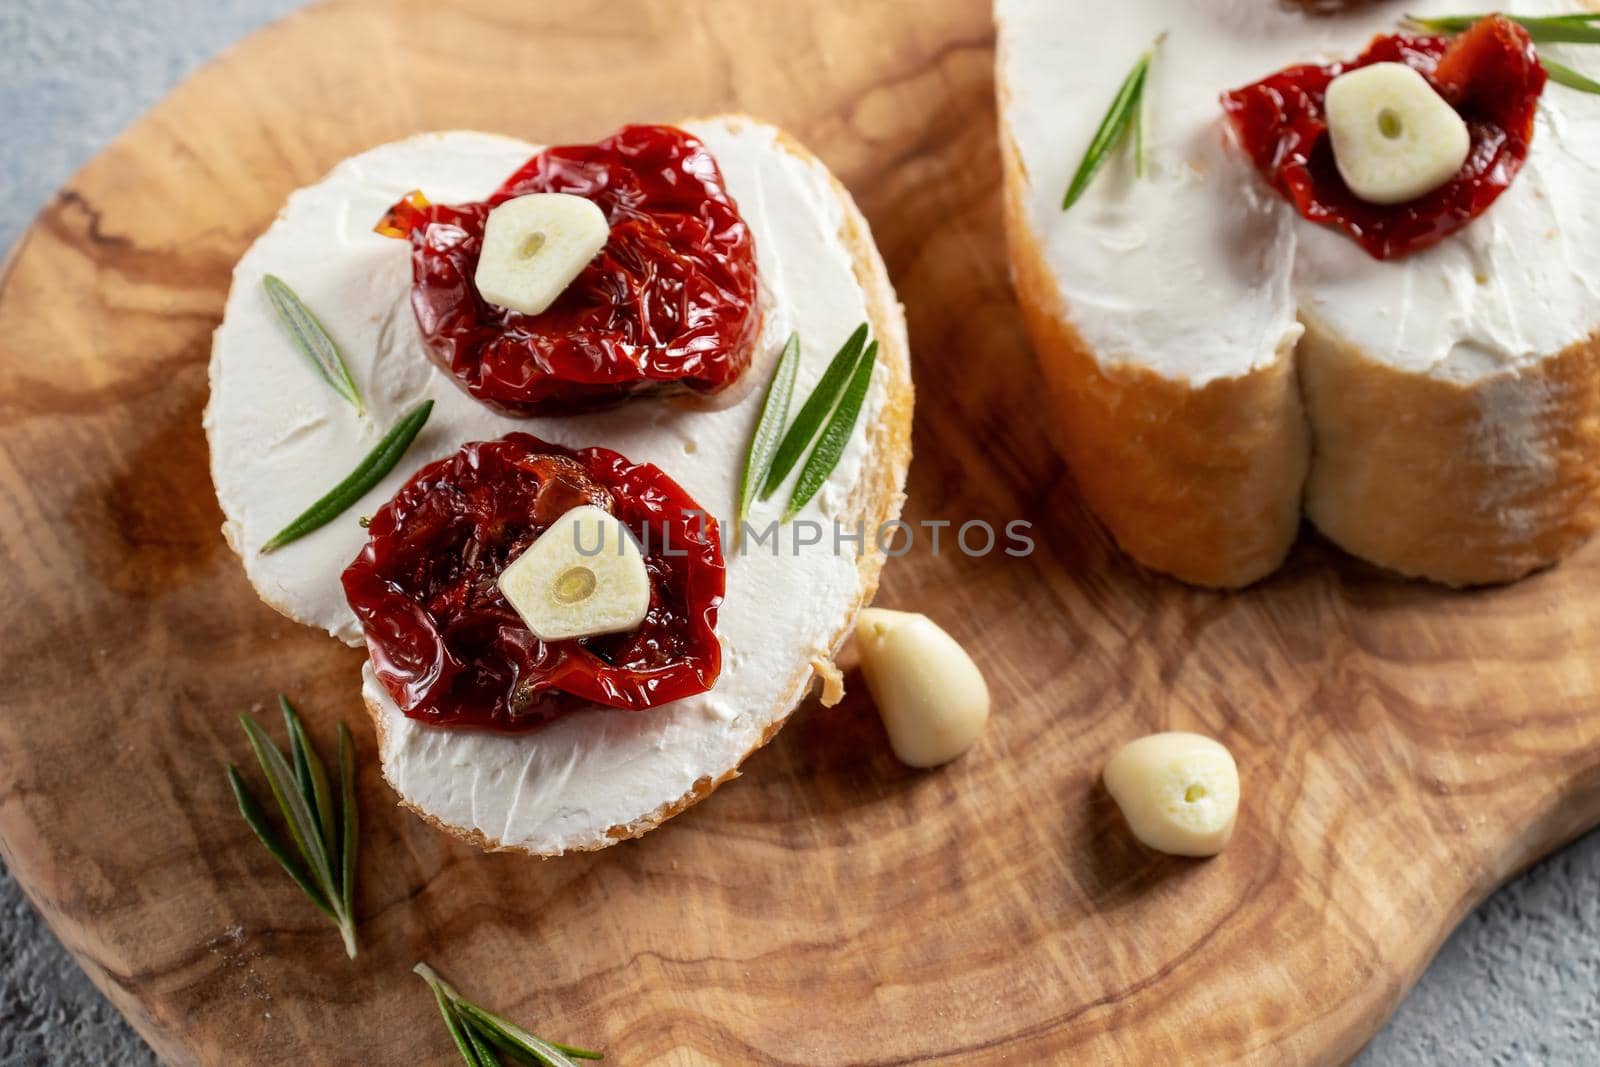 Homemade sandwiches with cream cheese and sun-dried tomatoes on a wooden board of olive - delicious healthy breakfast, italian cuisine by galsand